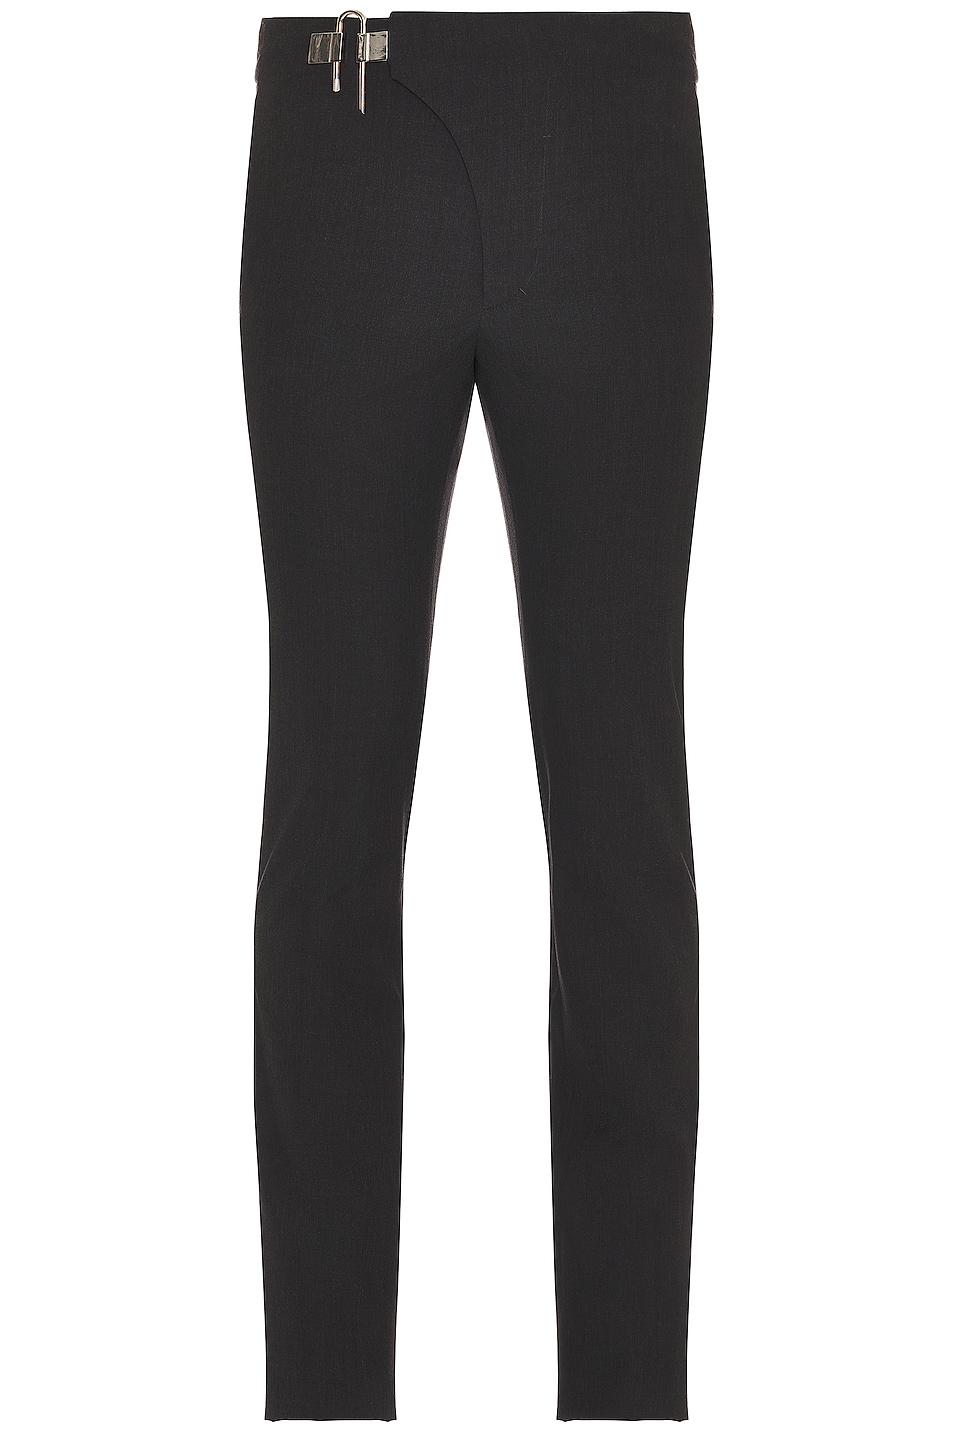 Image 1 of Givenchy Slim Fit Trousers With Side U Lock Belt in Grey Mix